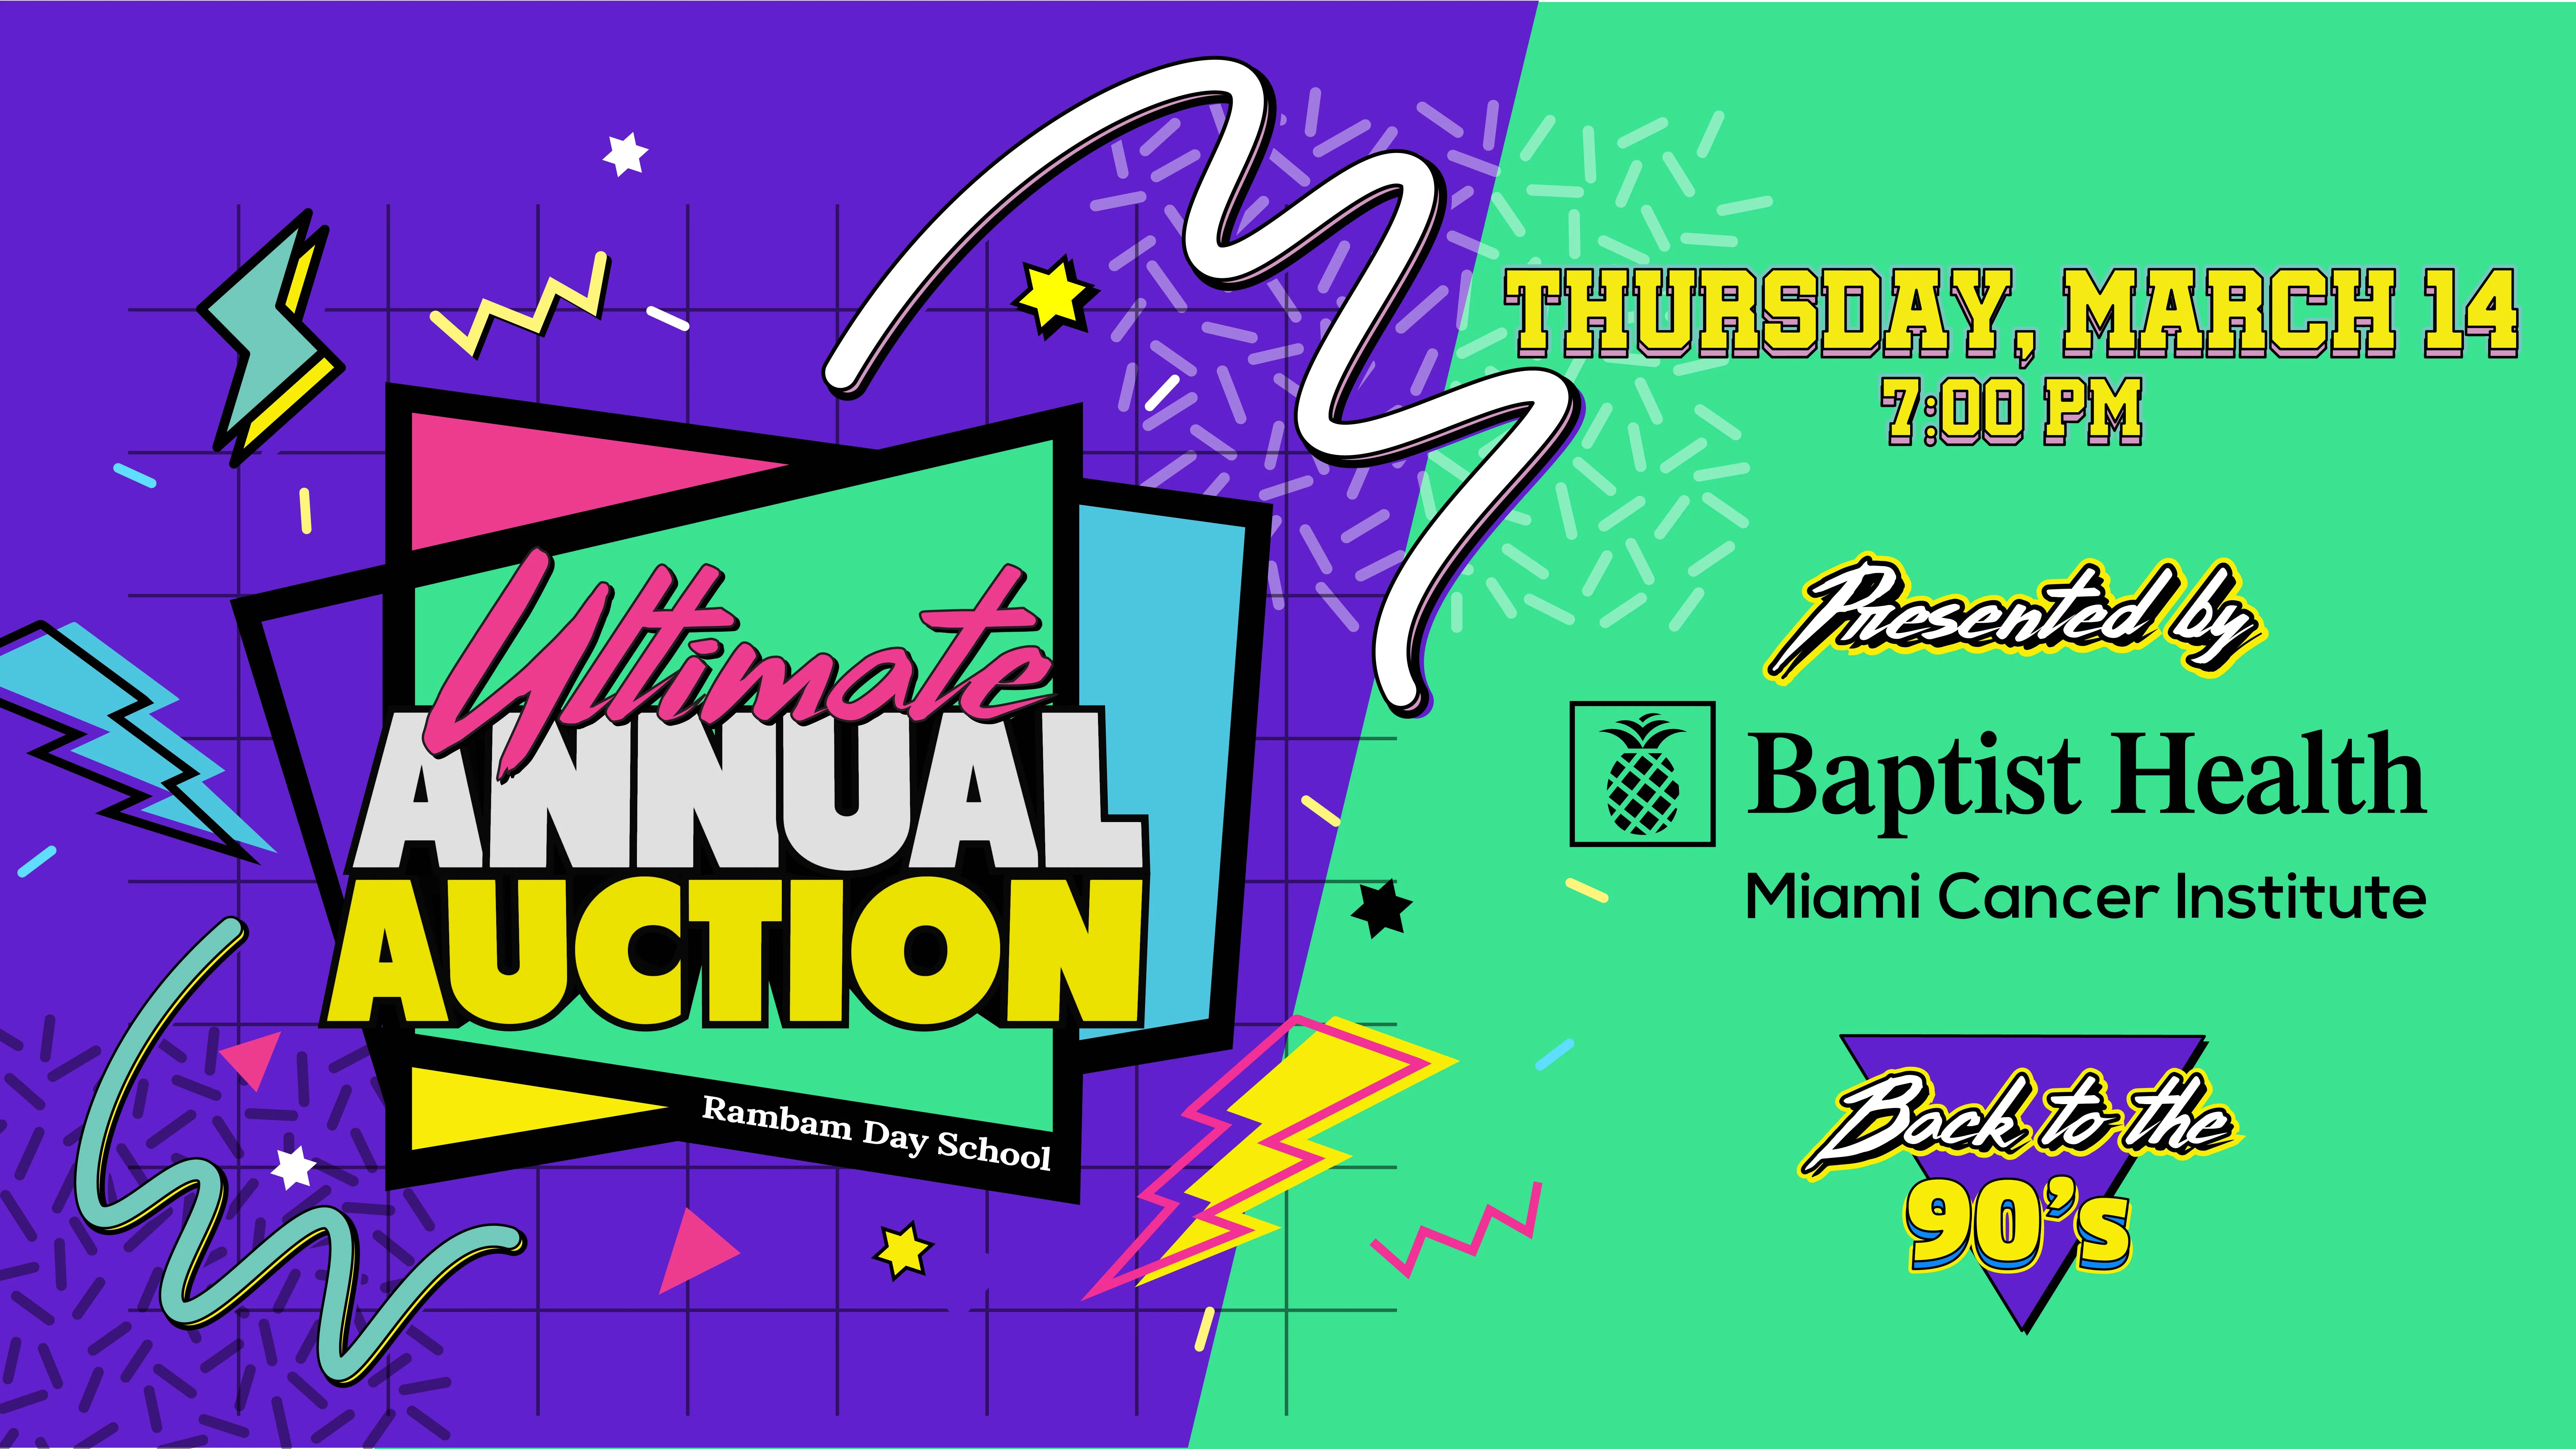 Annual Auction Updated Web Banner Presented by Baptist Health Miami Cancer Insitute